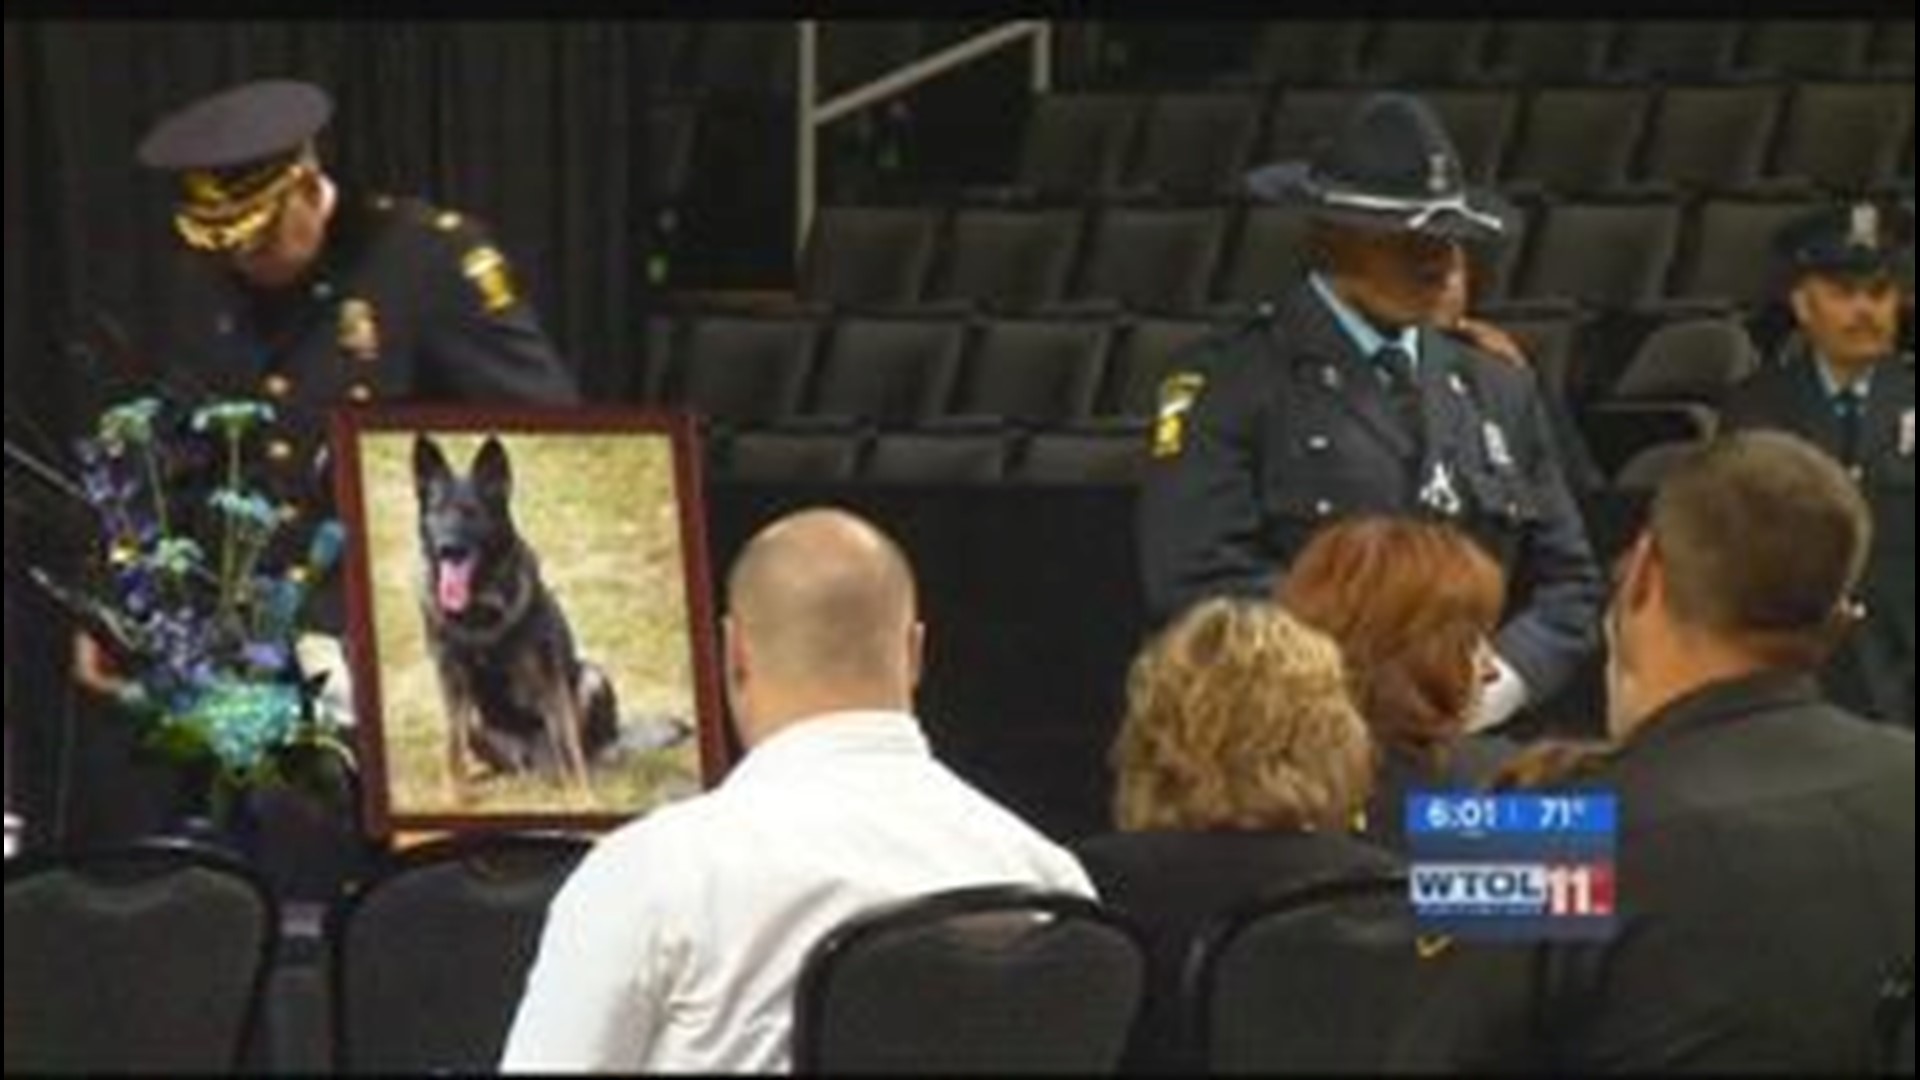 Life of Officer Falko remembered at memorial service Thursday